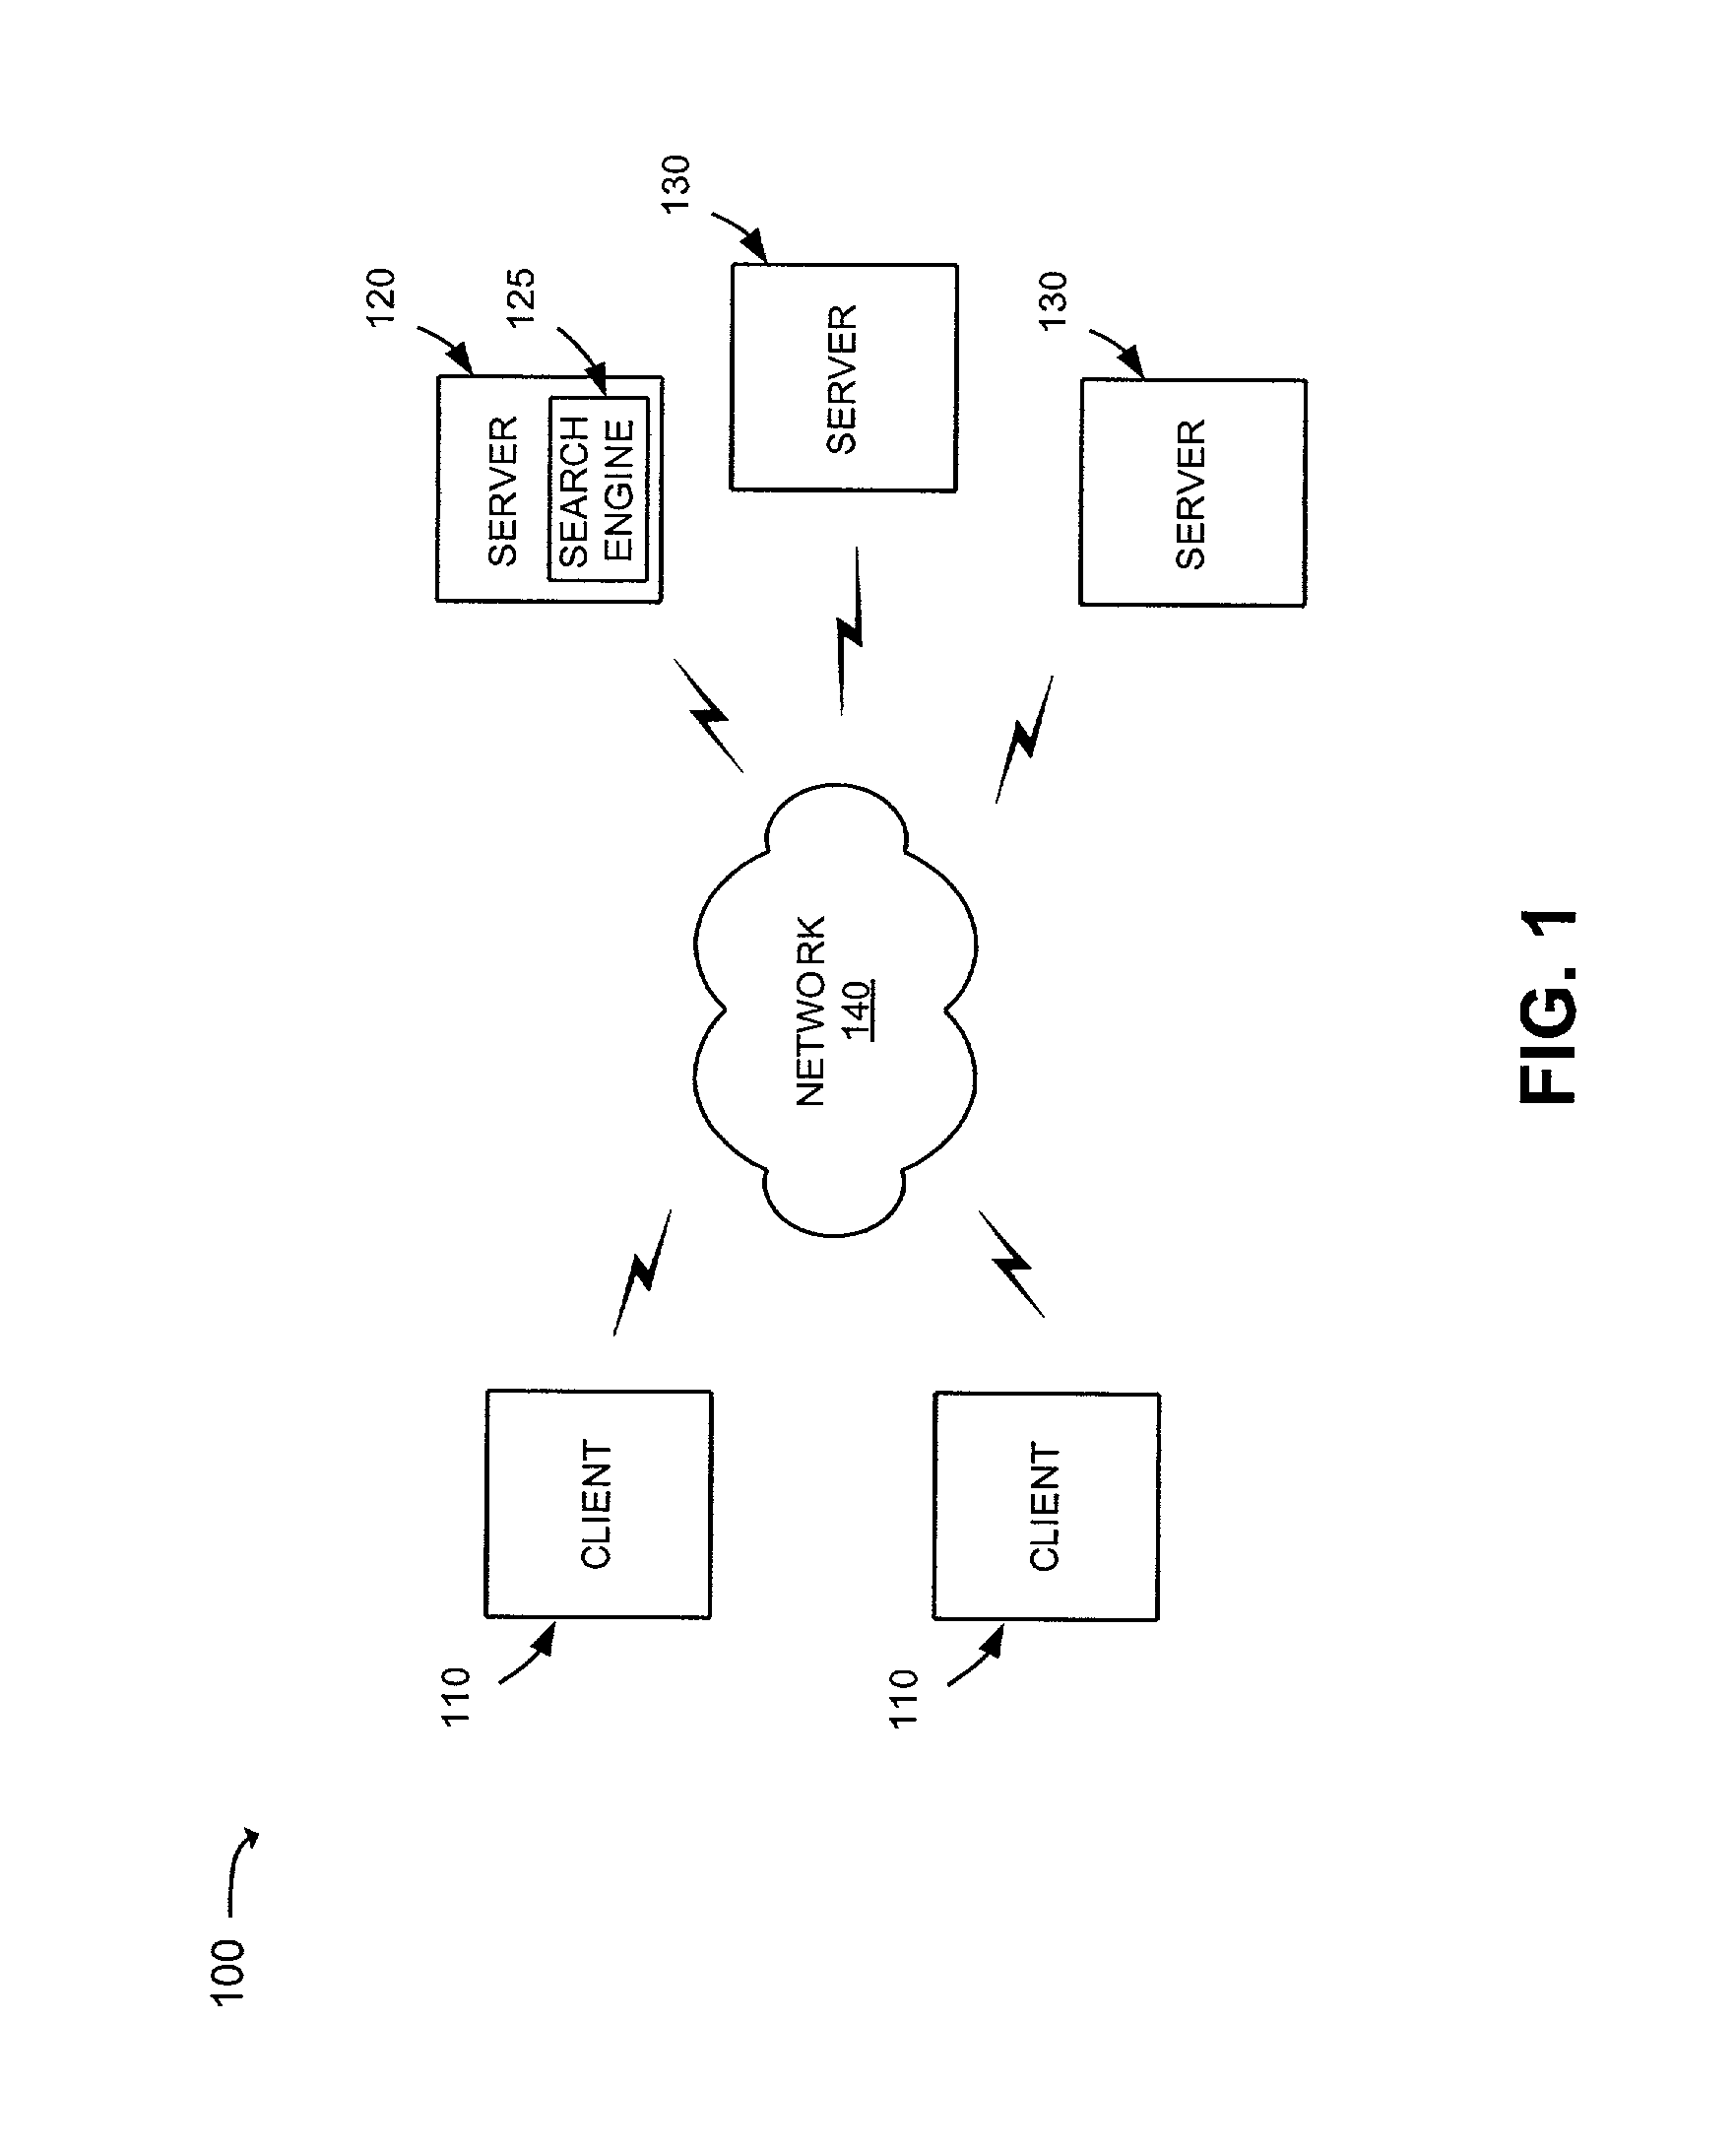 Methods and apparatus for providing search results in response to an ambiguous search query